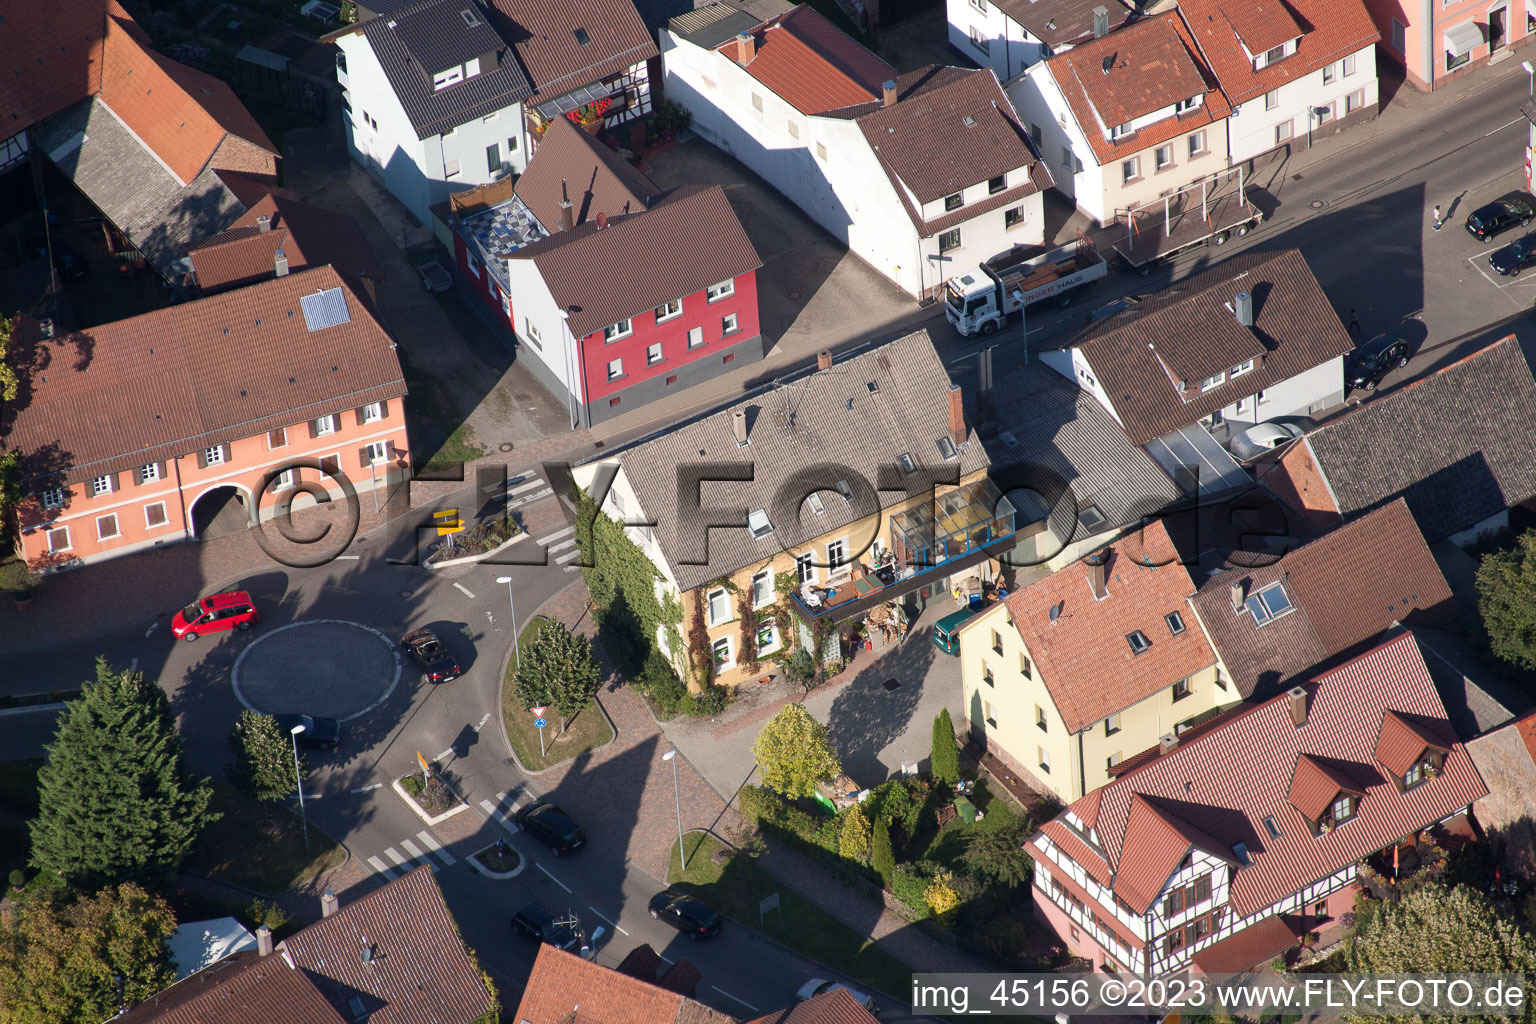 Hauptstr in the district Langensteinbach in Karlsbad in the state Baden-Wuerttemberg, Germany from the drone perspective